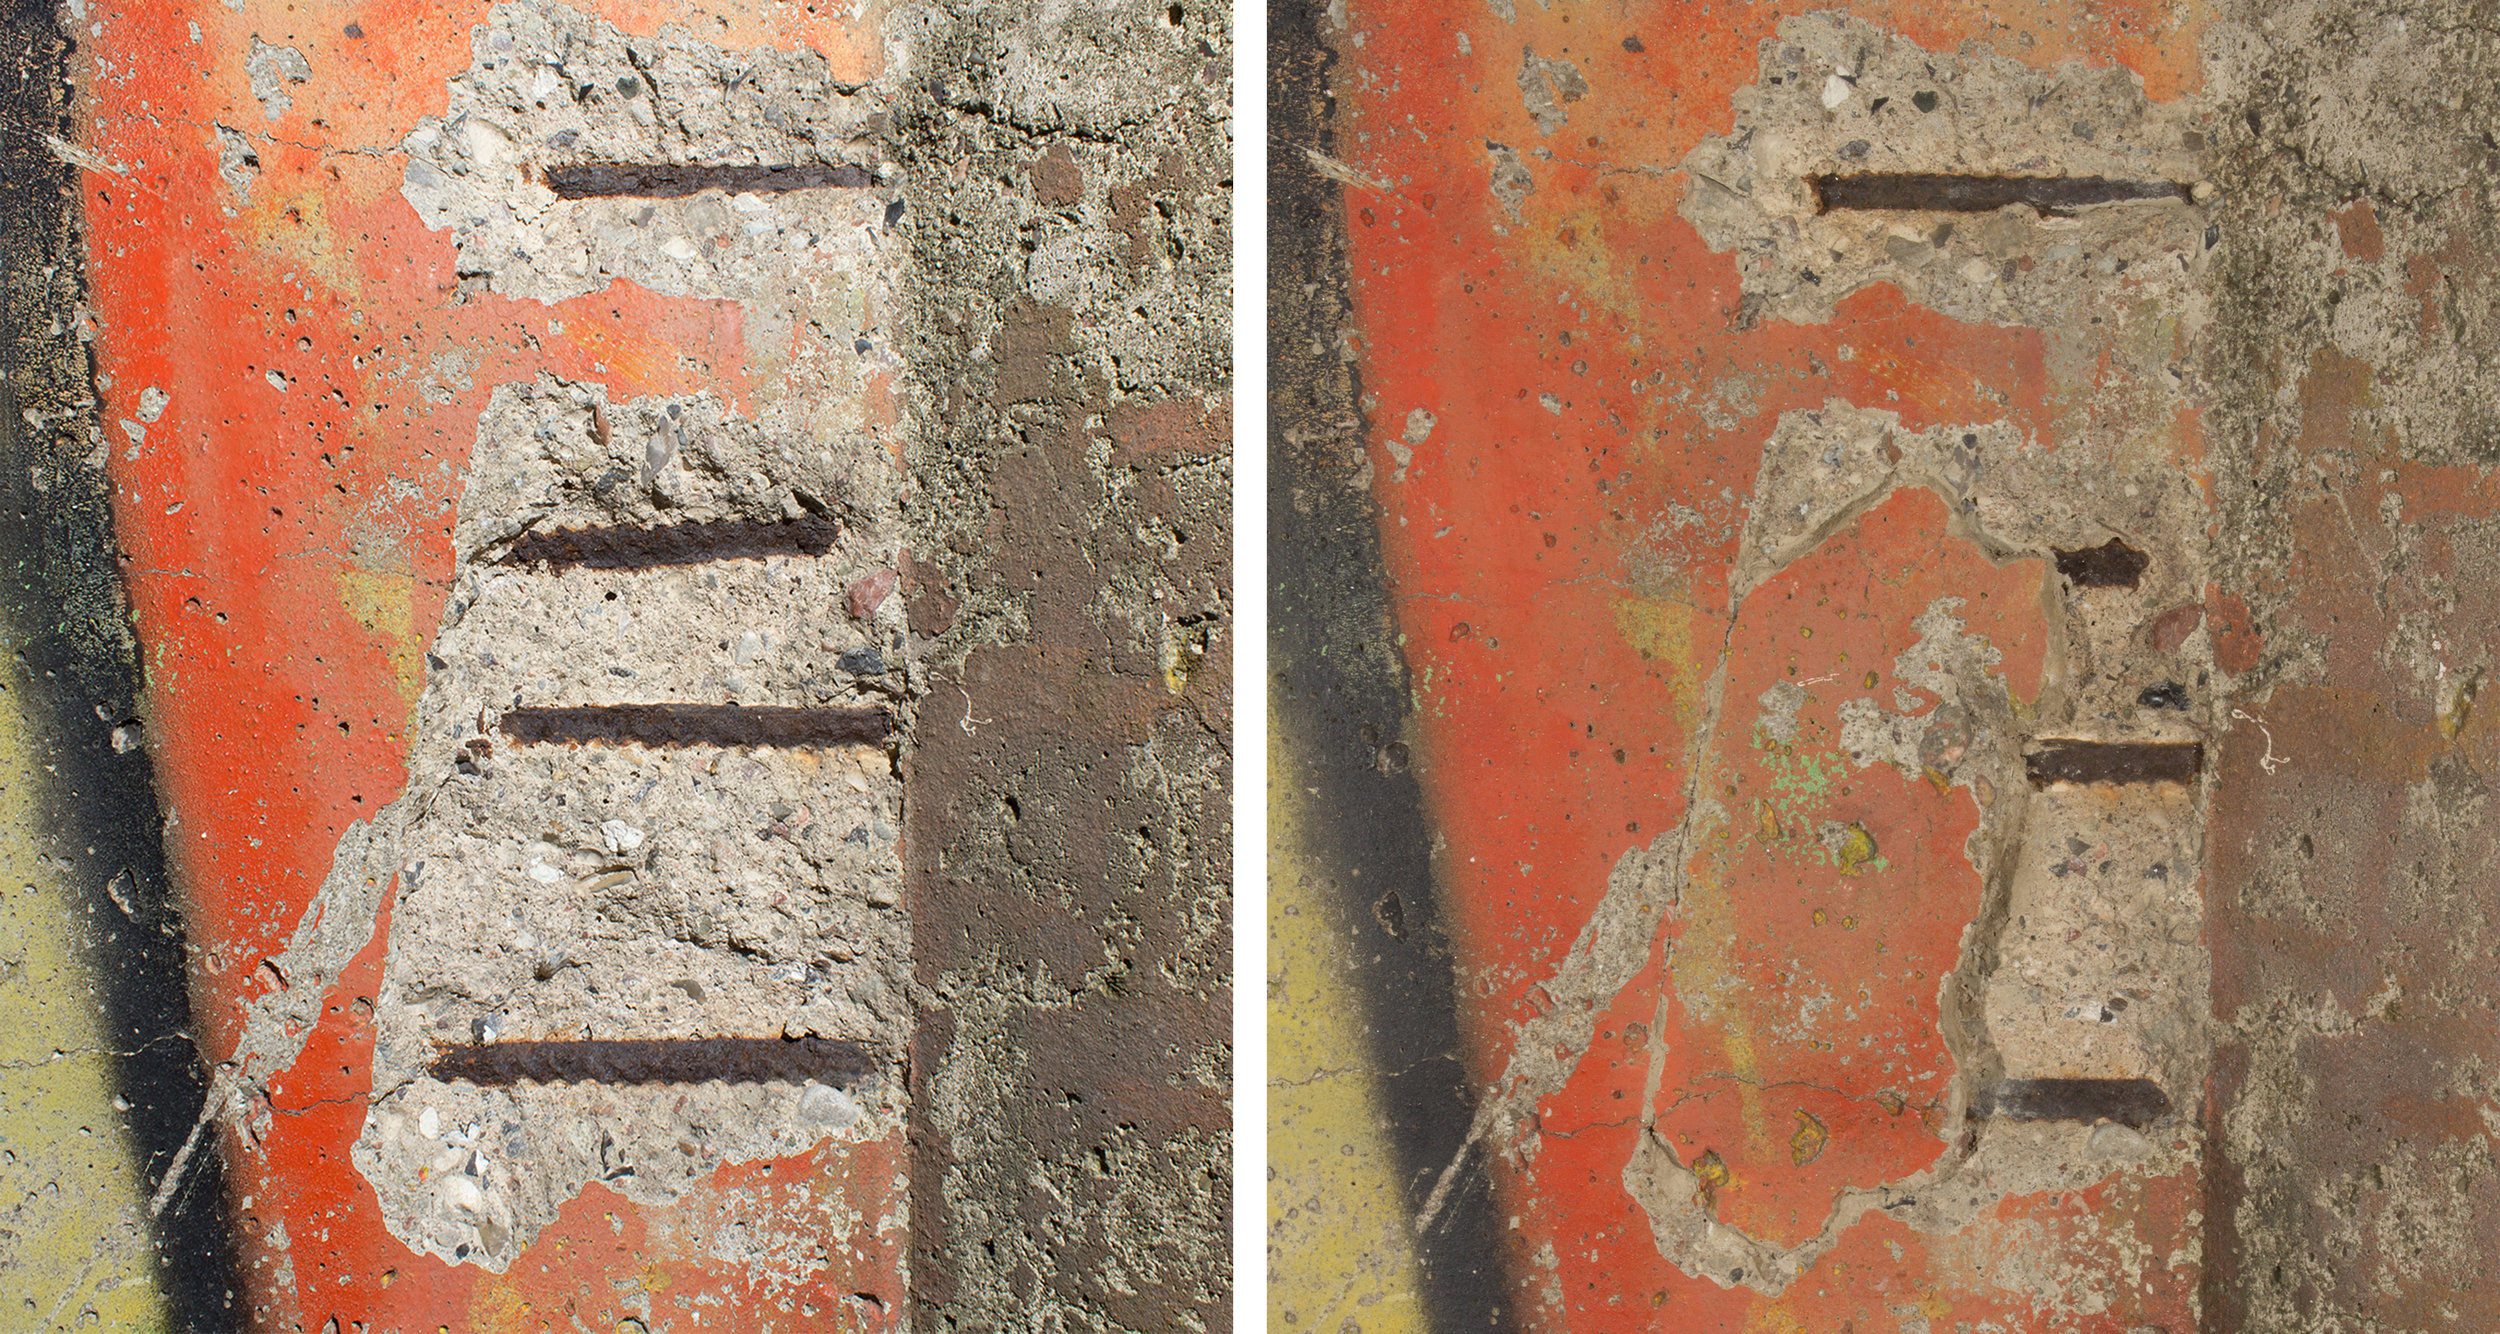  Results of injection grouting. Before (left), After (right)  Image © Katey Corda, 2015 